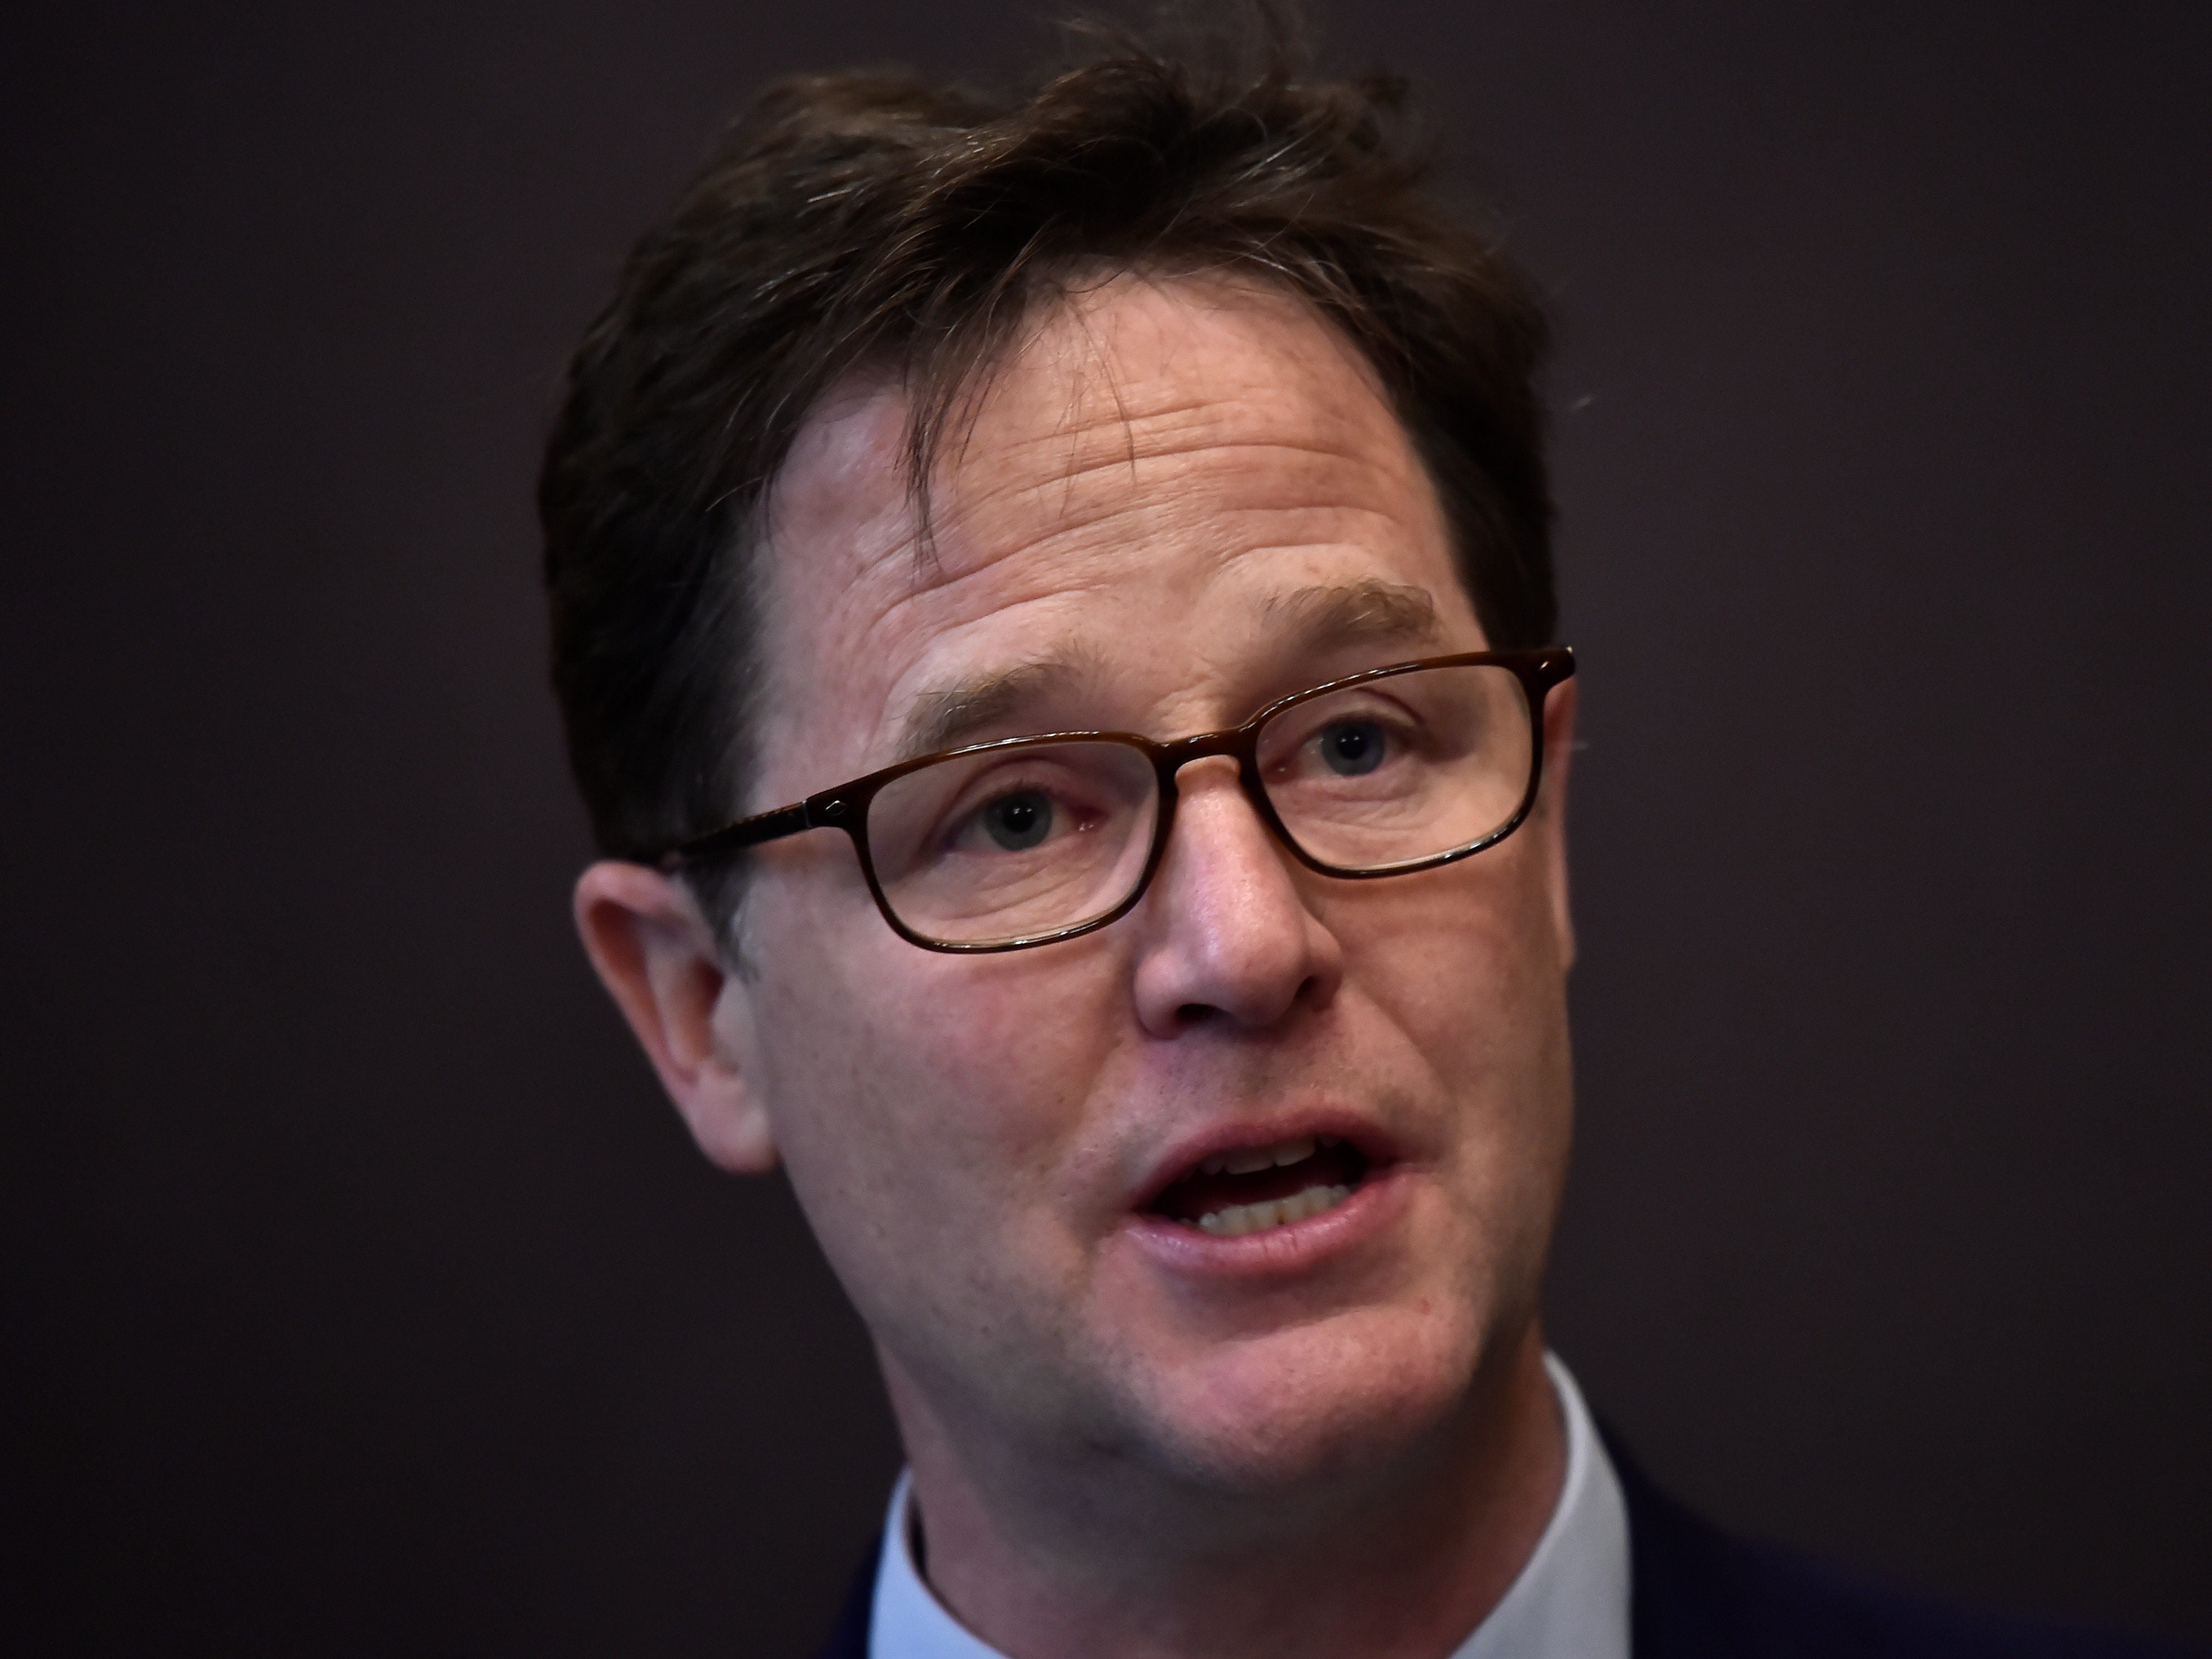 Traditional media more responsible for Brexit vote than Facebook, says Nick Clegg